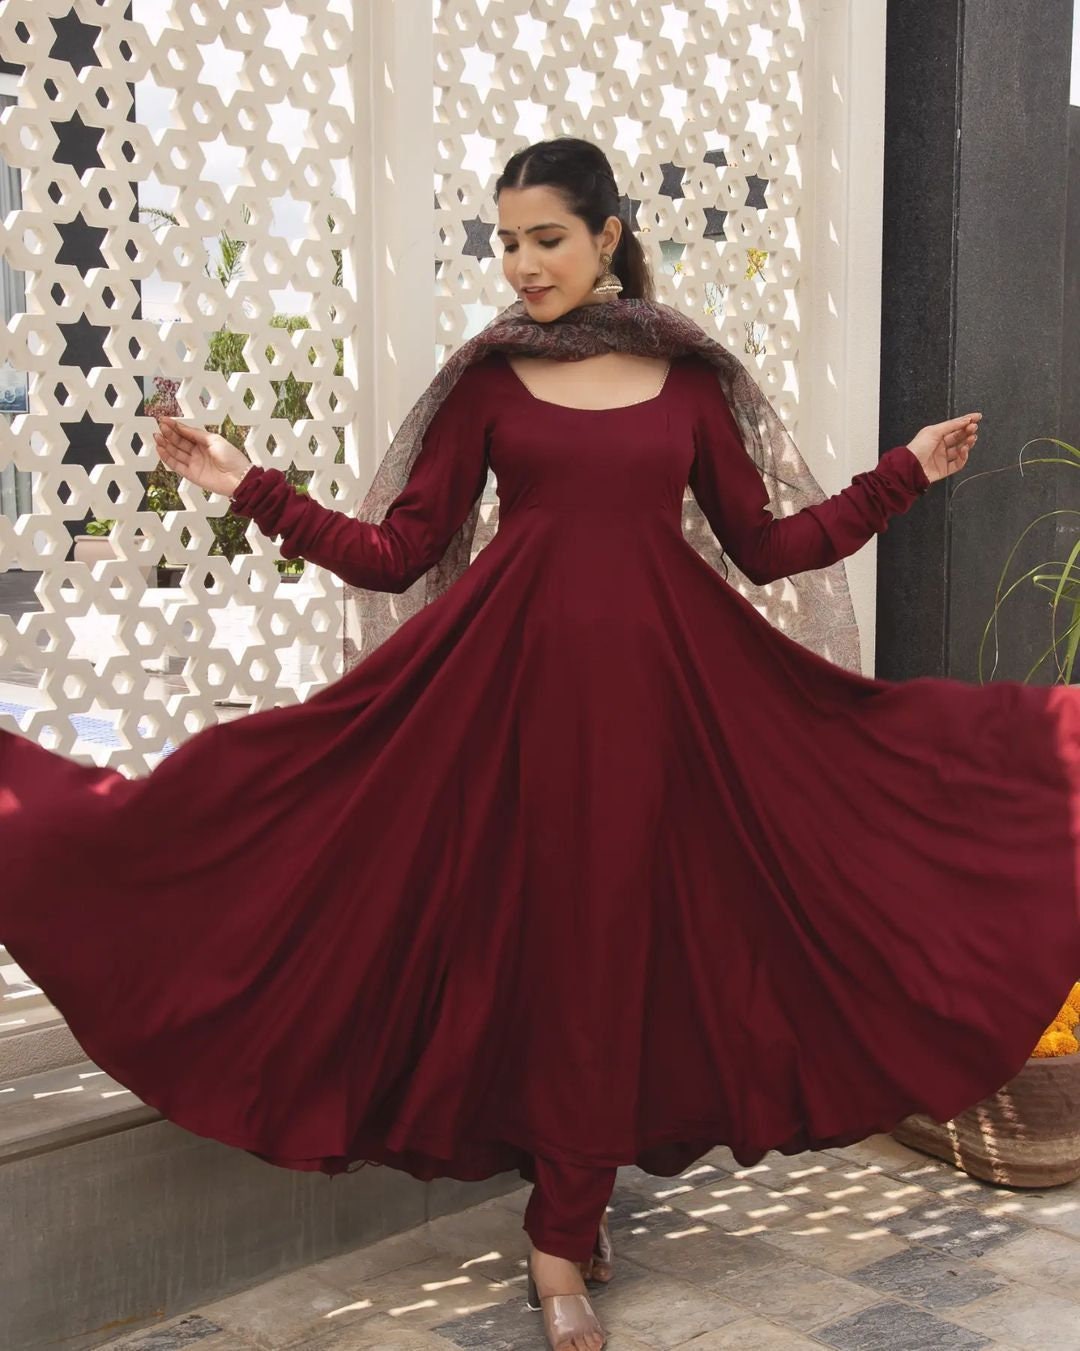 Anarkali Suits - Shop Anarkali Dresses in USA with Free Shipping